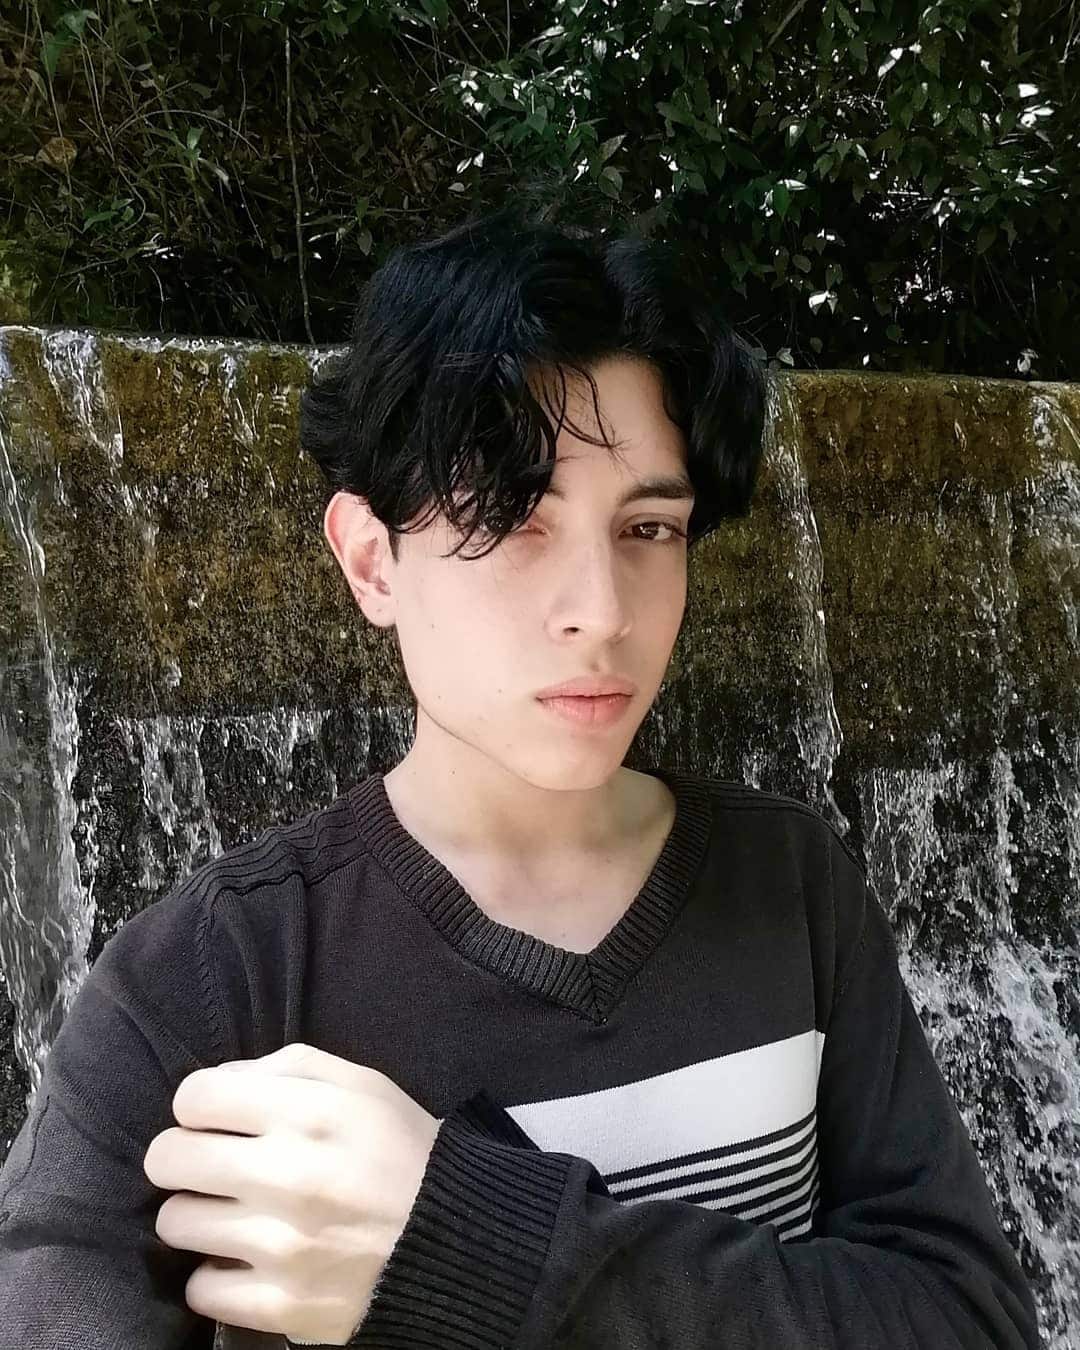 20 cool eBoy haircut ideas to try in 2021 to look great